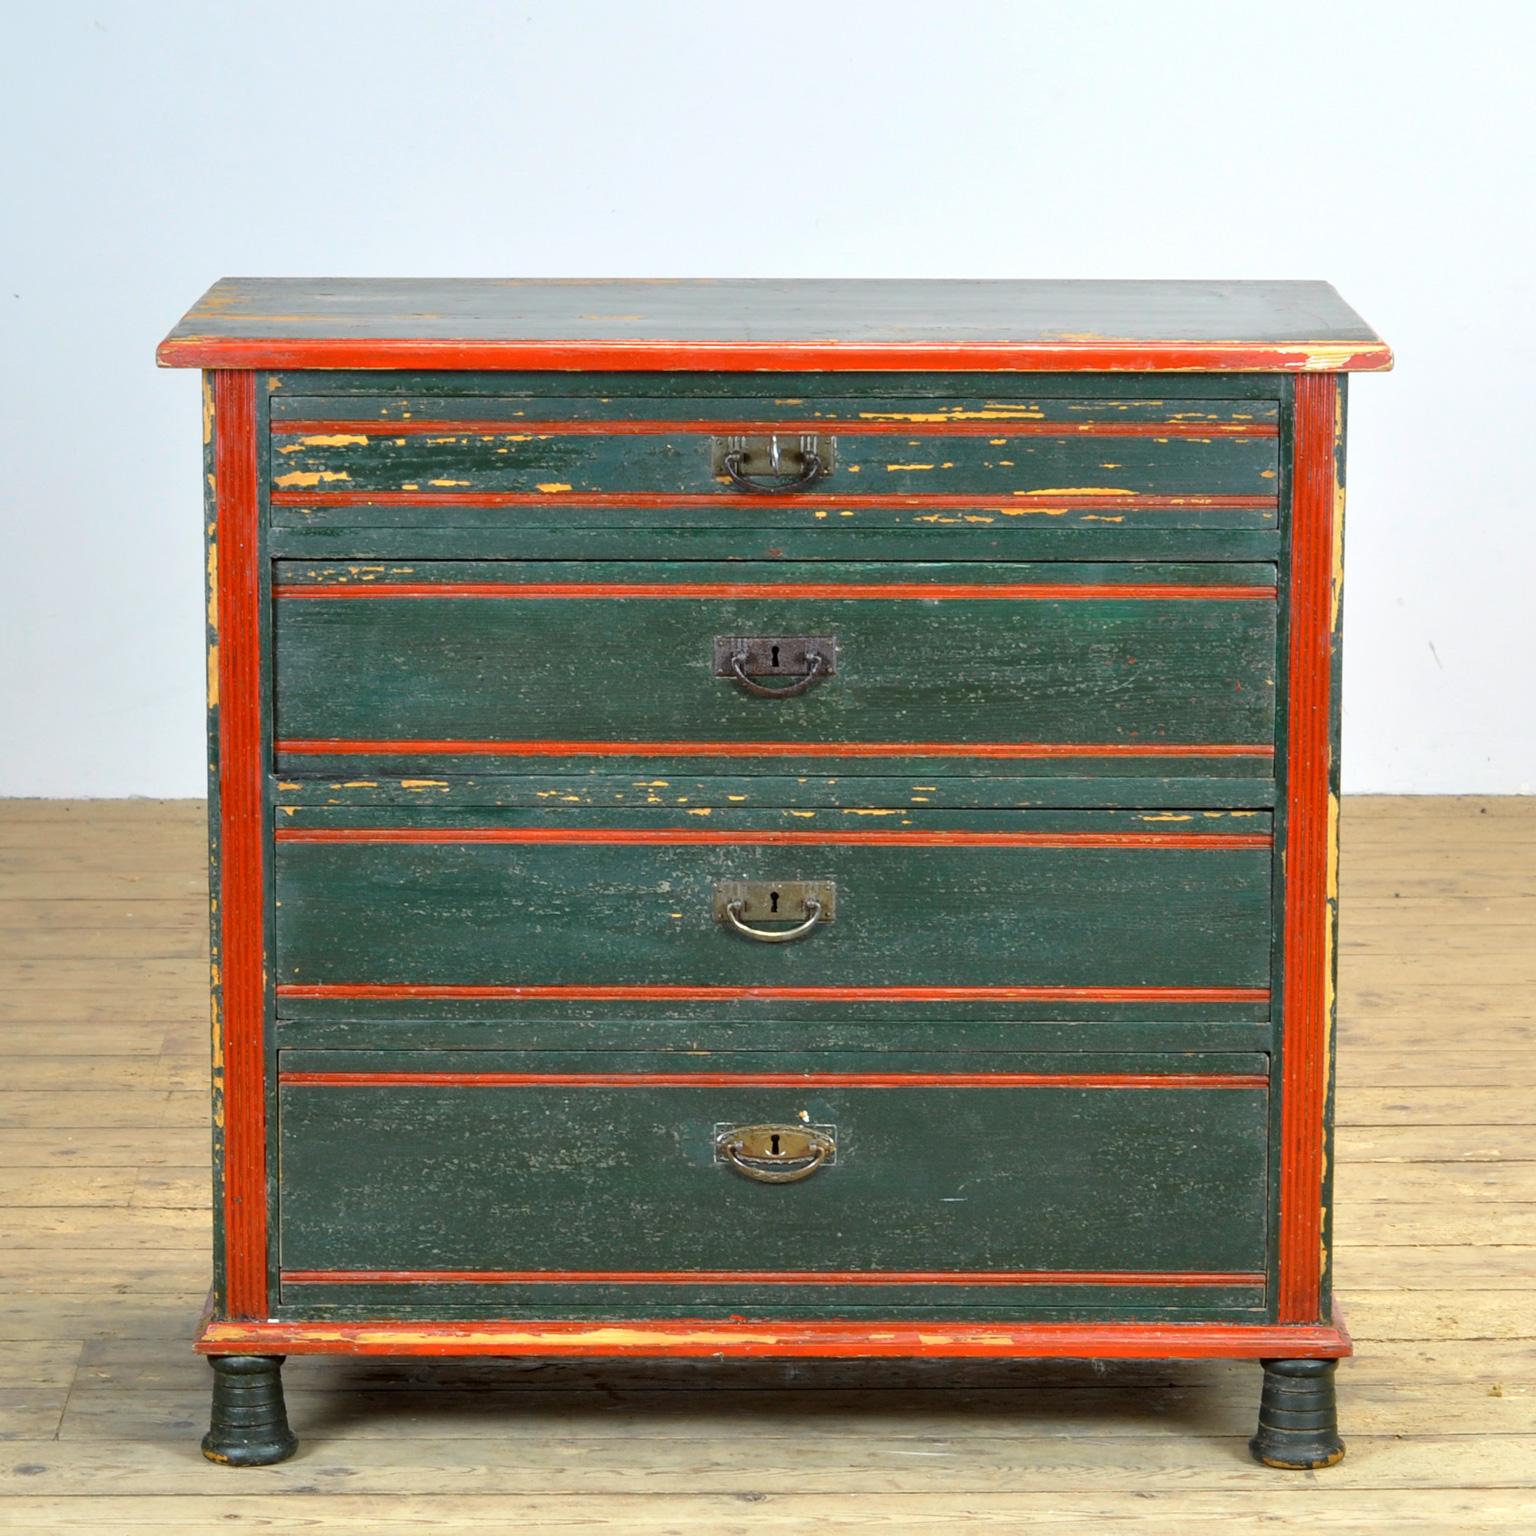 Chest of drawers made of pine, made in Austria circa 1920. The cabinet is painted in a beautiful green with accents of red.
The cabinet has 4 drawers with different heights. The drawers are made with dovetail joints. All fittings and knobs are